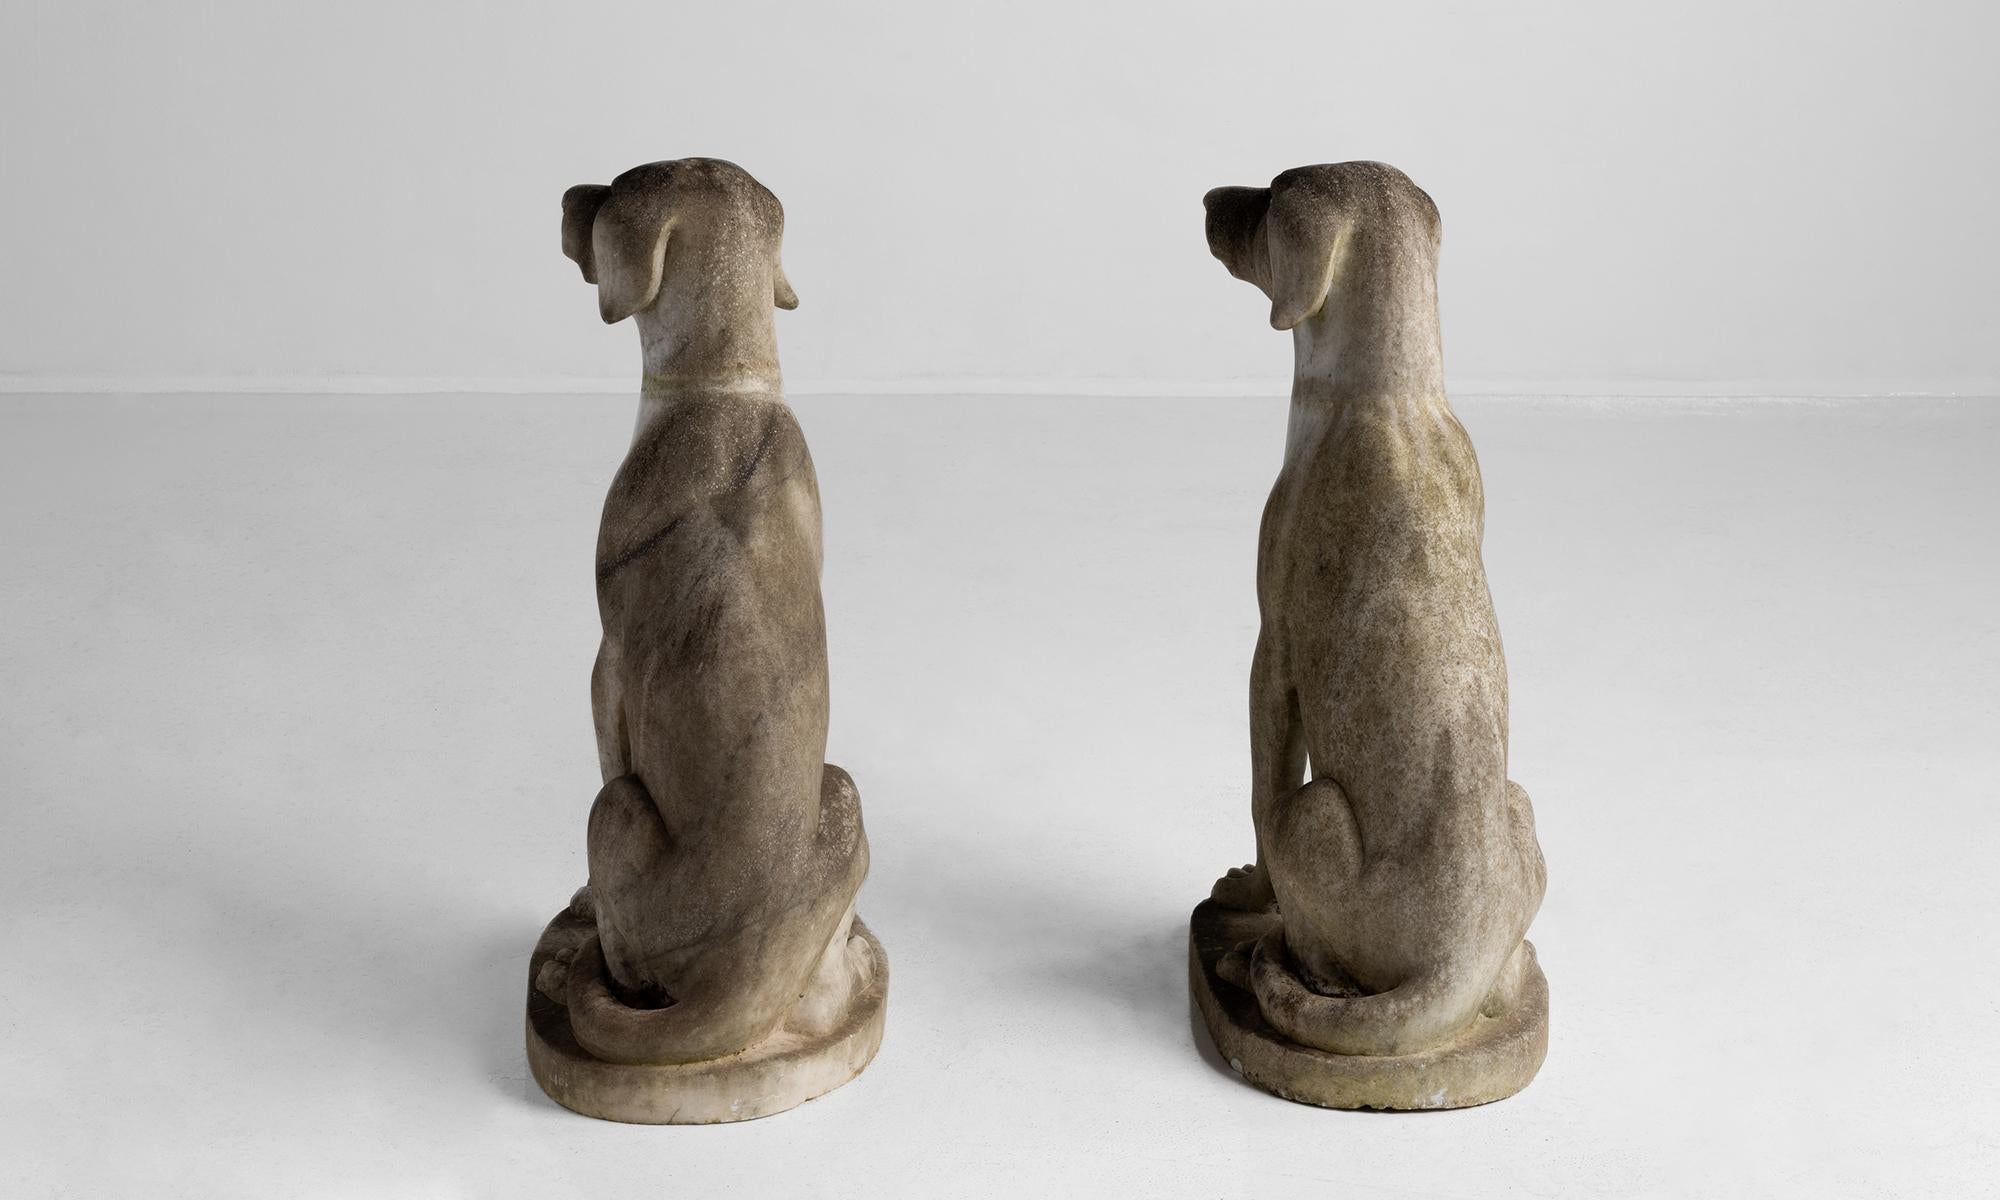 Pensive Dog Statues in Marble 1